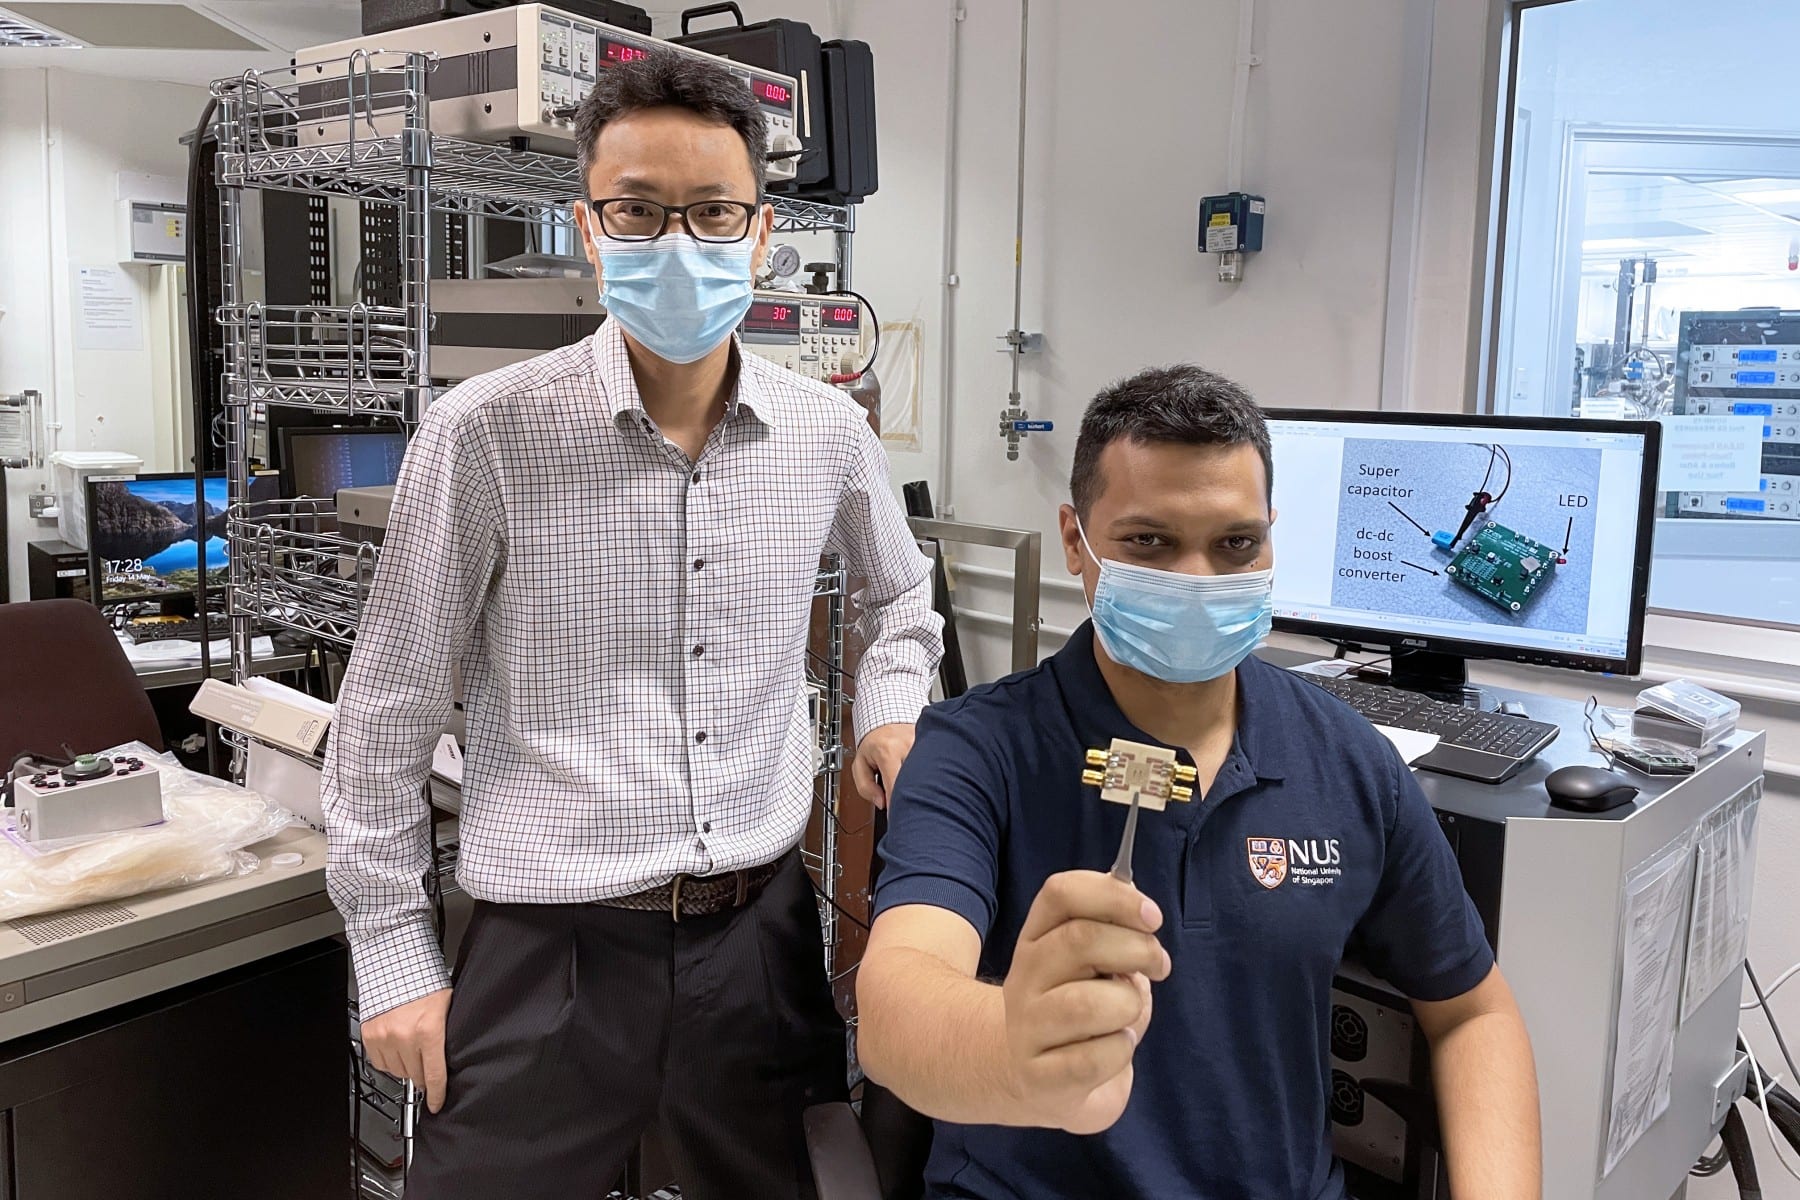 The research breakthrough was achieved by a team led by Professor Yang Hyunsoo (left). Dr Raghav Sharma (right), the first author of the paper, is holding a chip embedded with about 50 spin-torque oscillators.